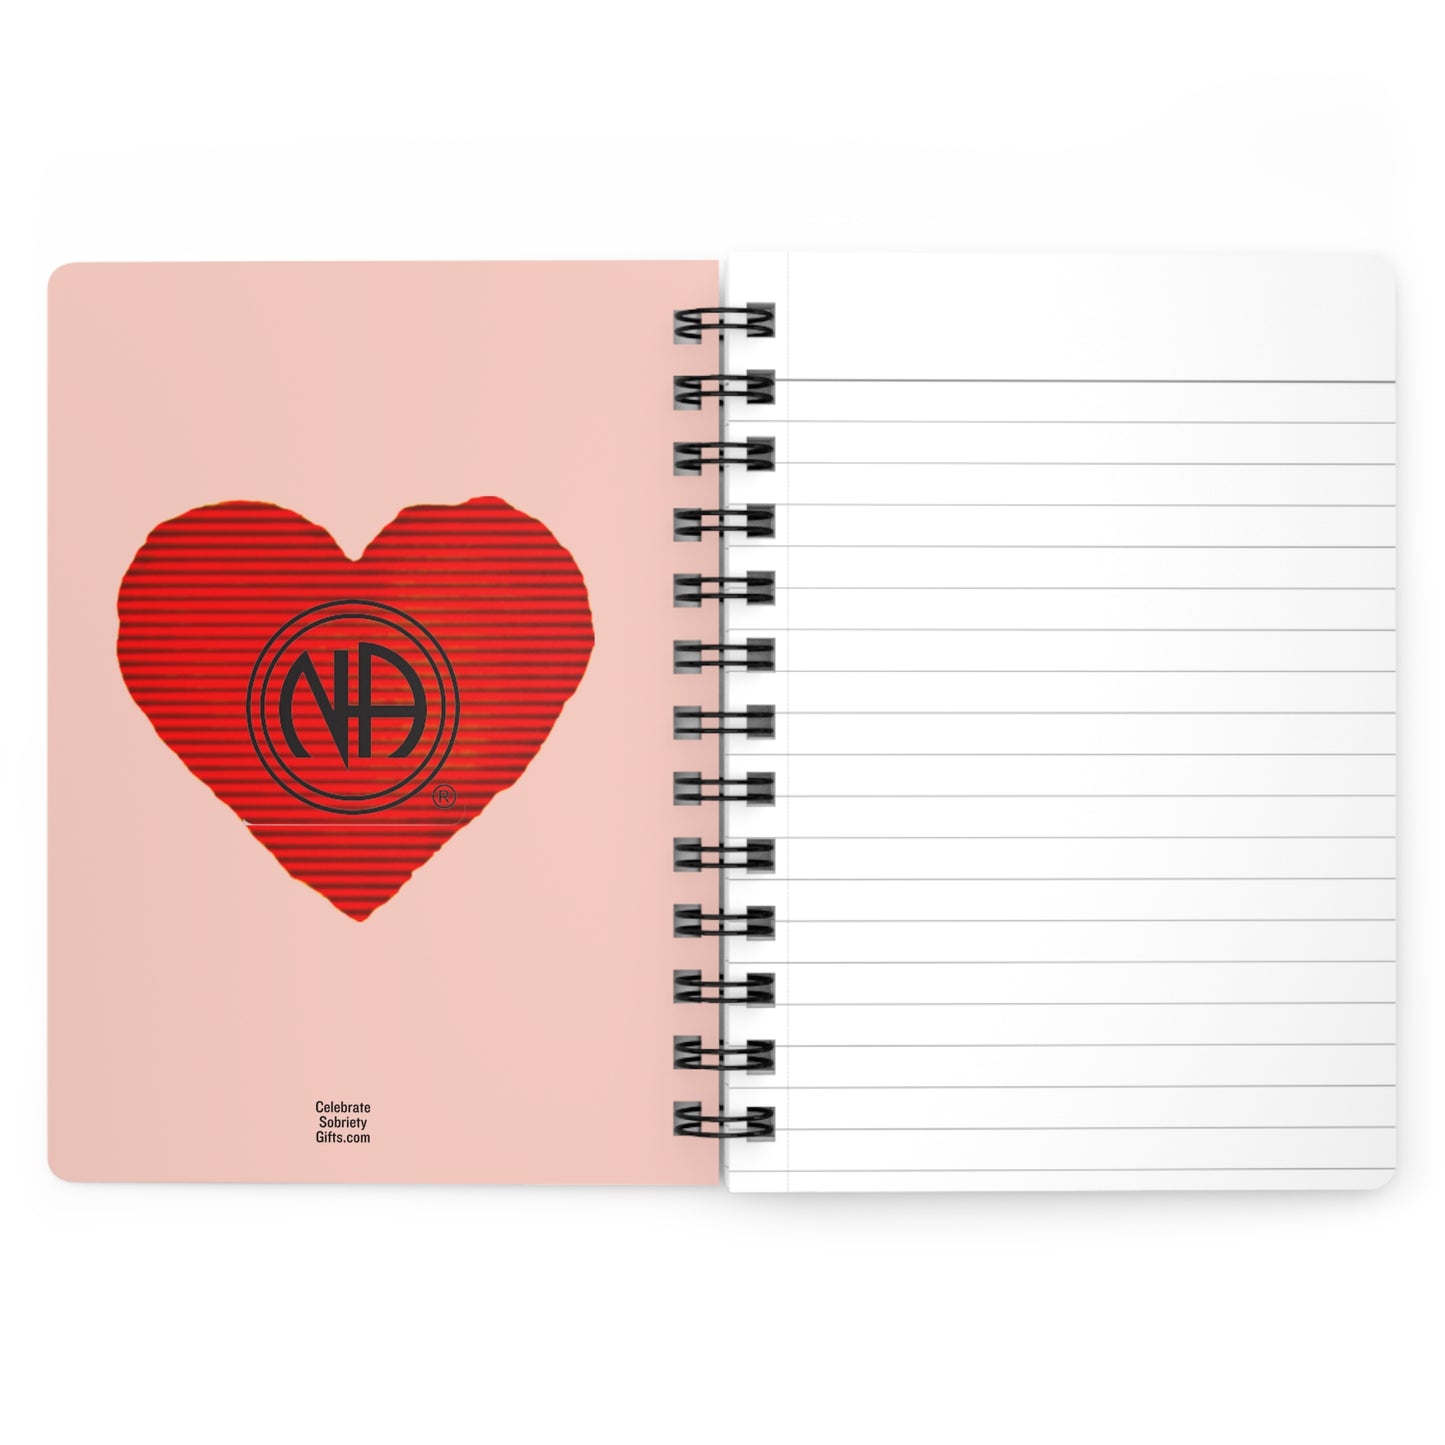 "Just 4 Today Heart" Recovery Journal